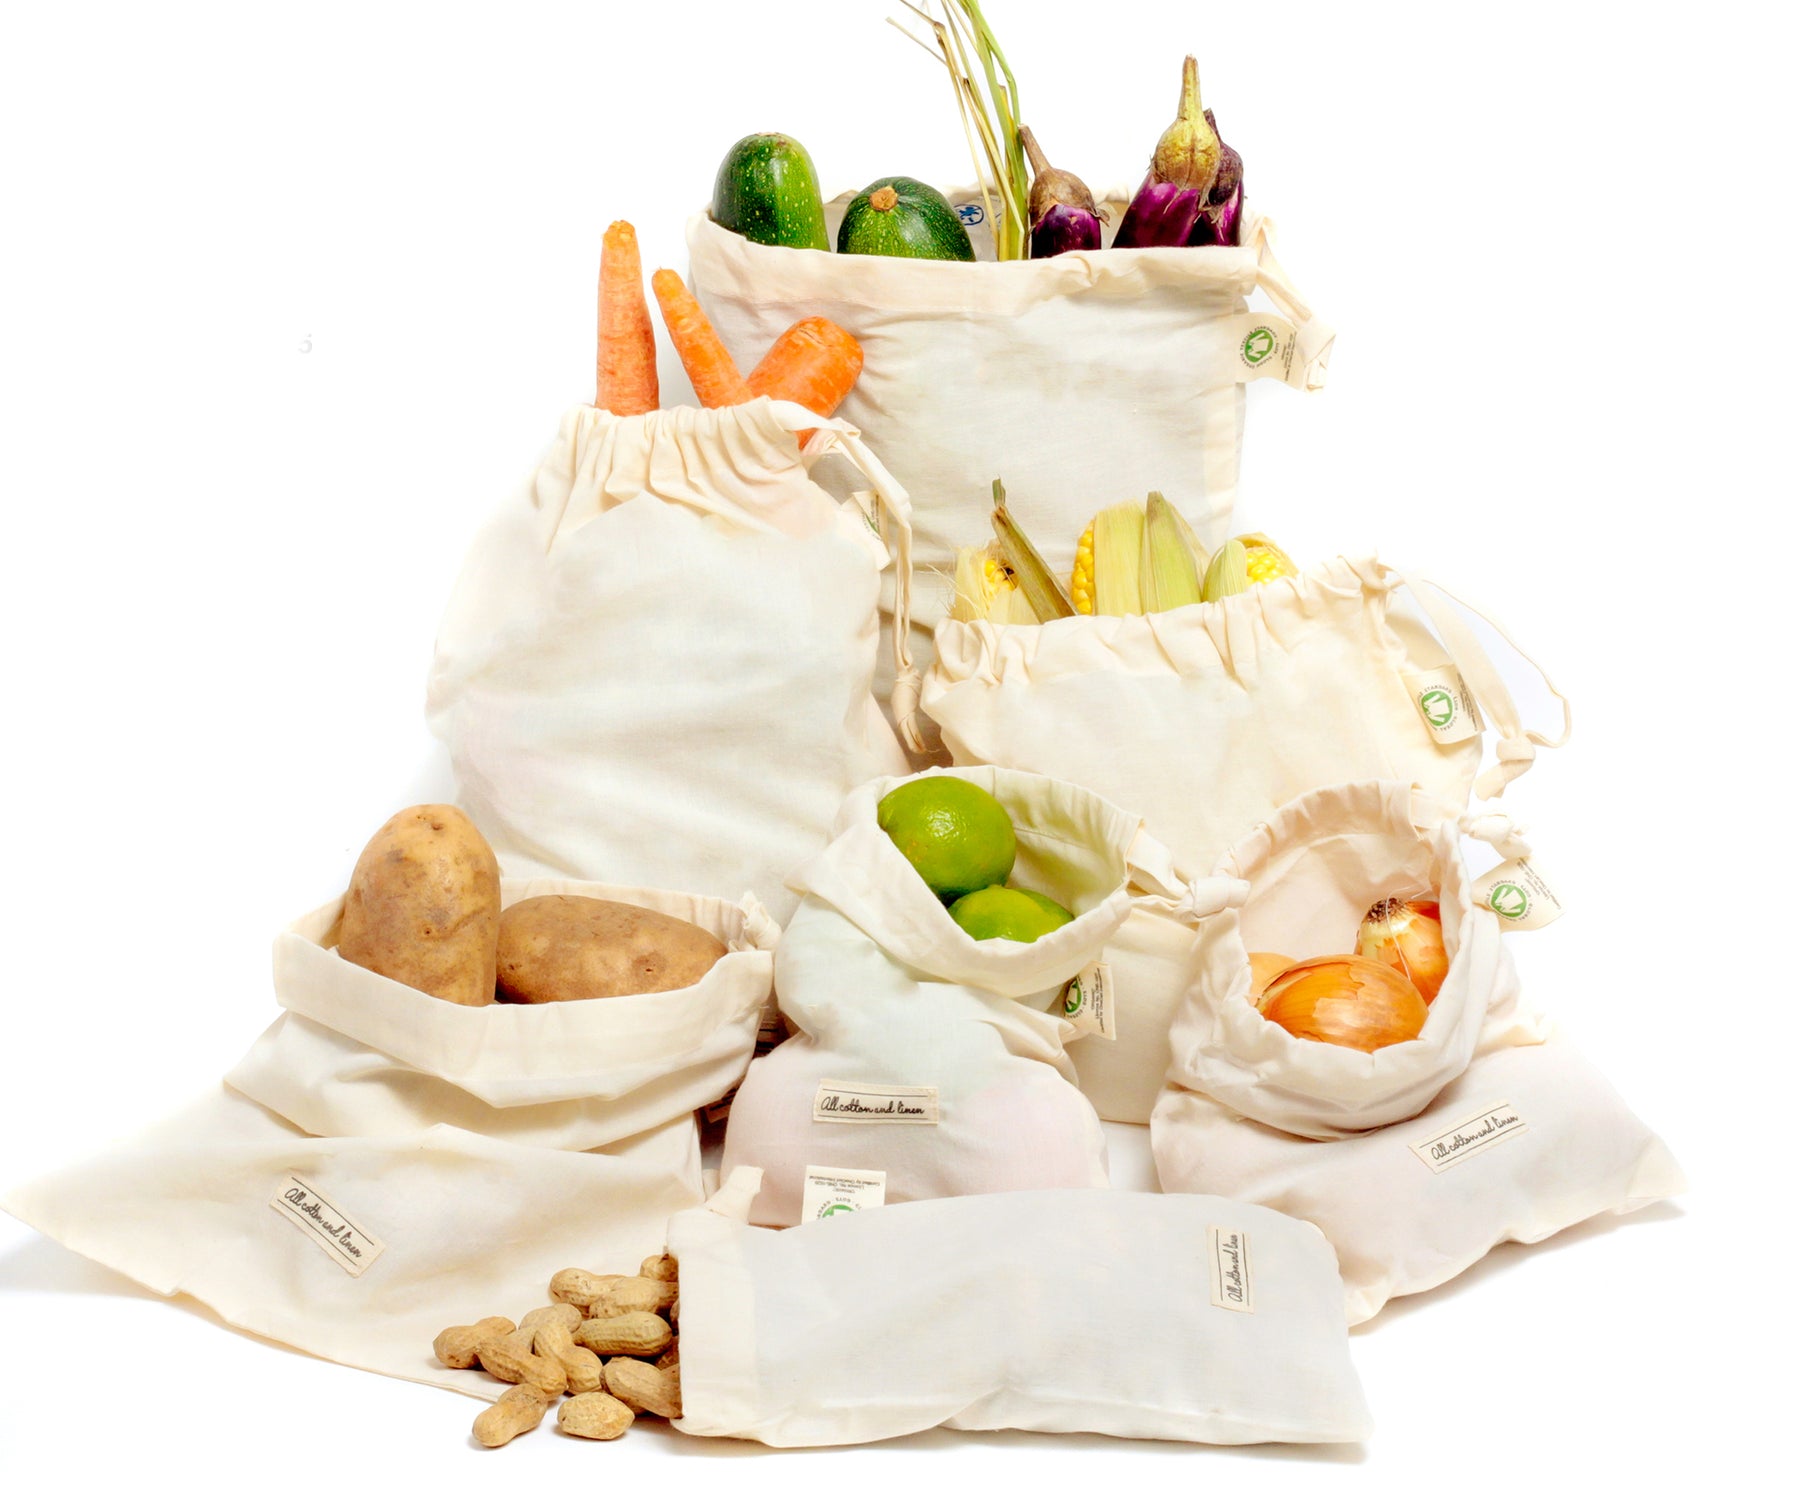 Select muslin drawstring bags, cotton muslin bags, cotton mesh produce bags, and reusable cotton produce bags to support sustainable packaging and storage. These choices prioritize eco-conscious practices, minimize waste, and contribute to a greener environment.